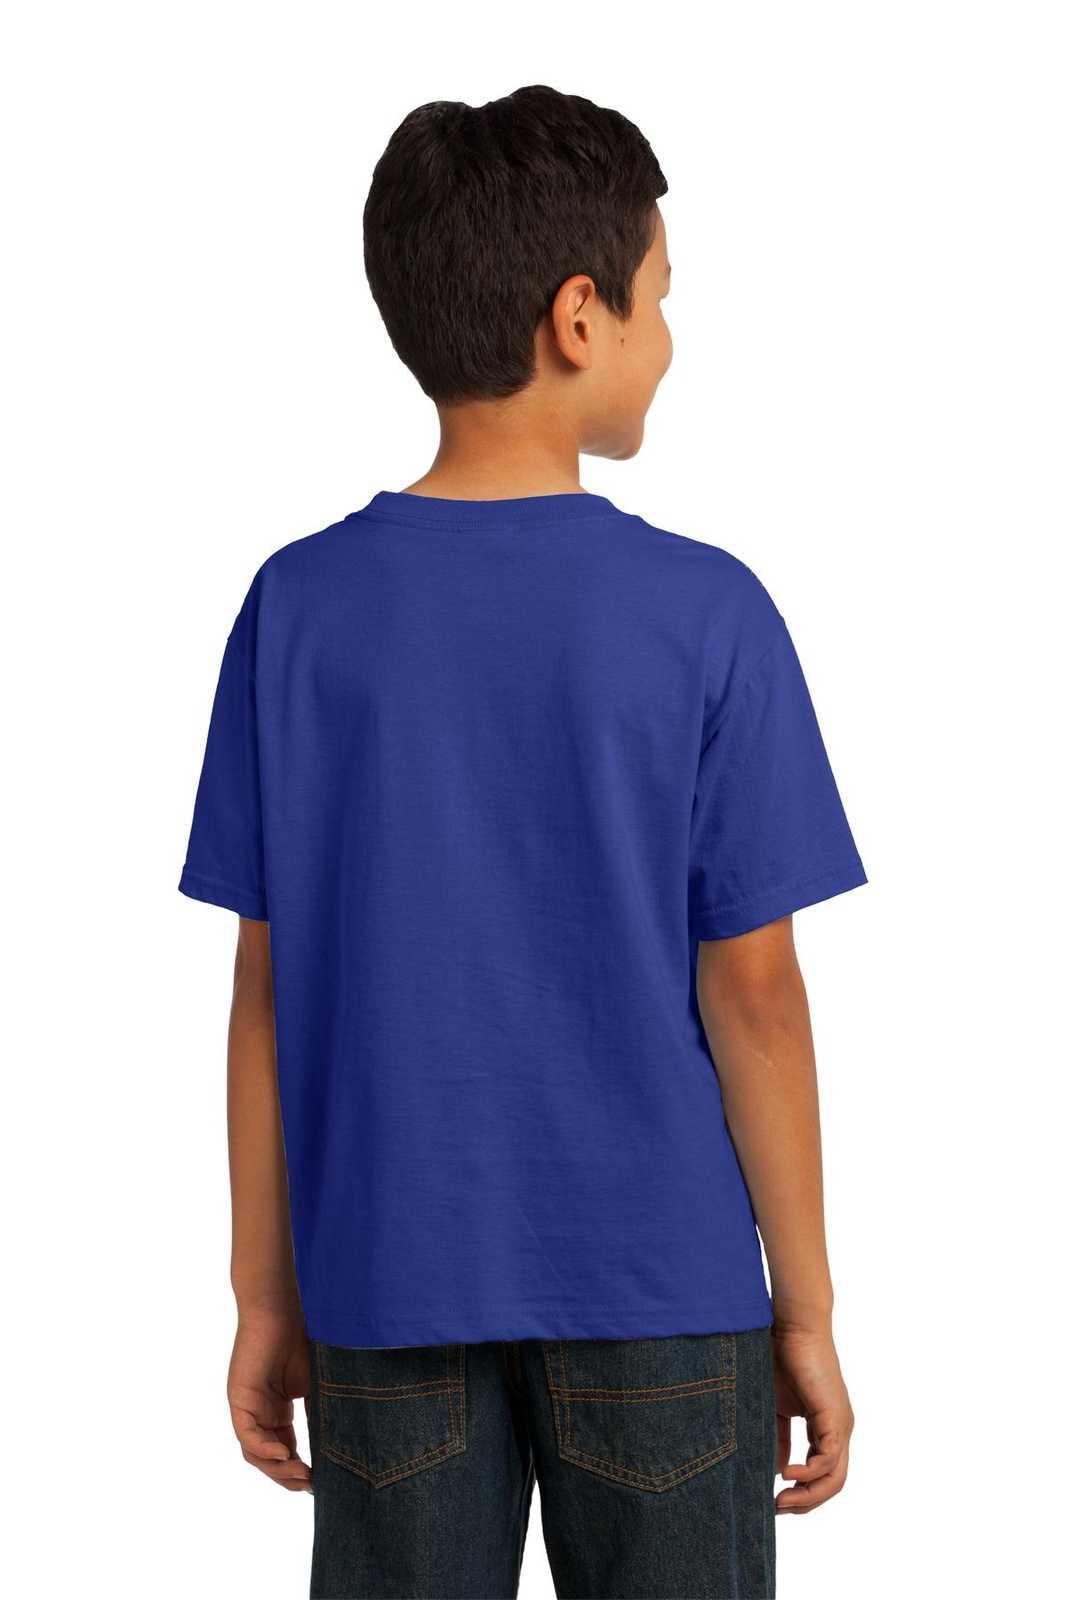 Fruit of the Loom 3930B Youth HD Cotton 100% Cotton T-Shirt - Royal - HIT a Double